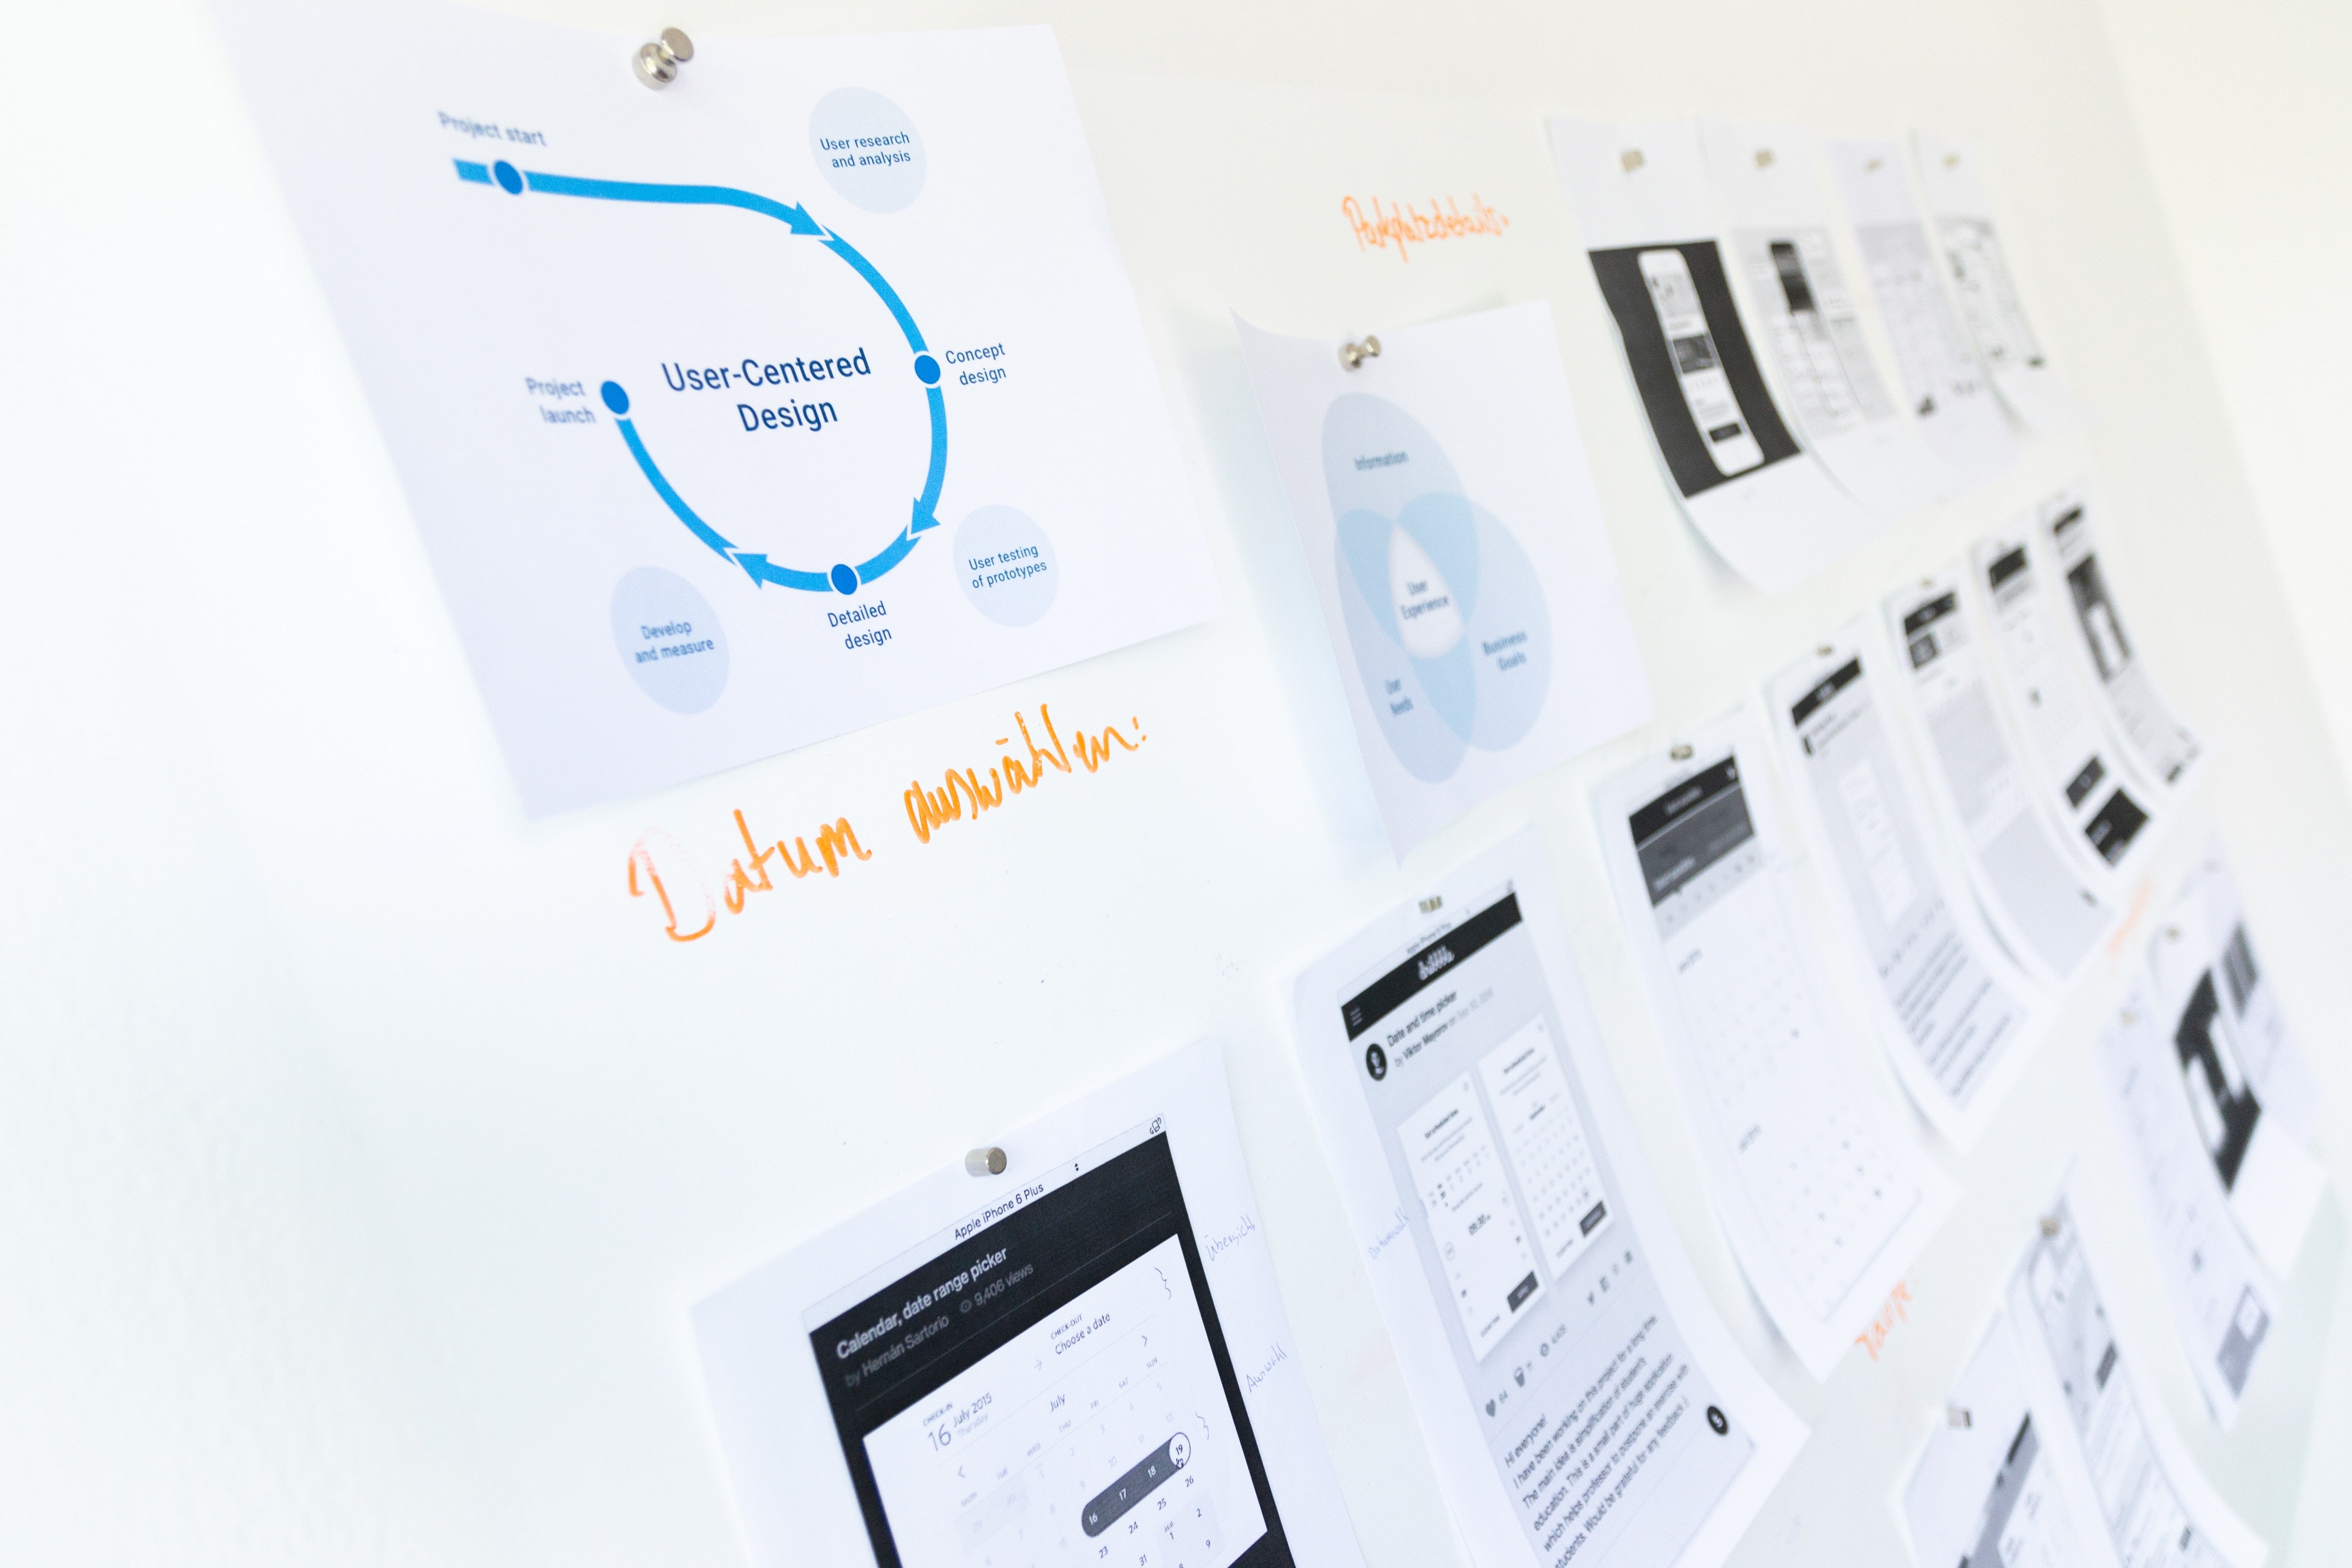 Whiteboard with UX materials